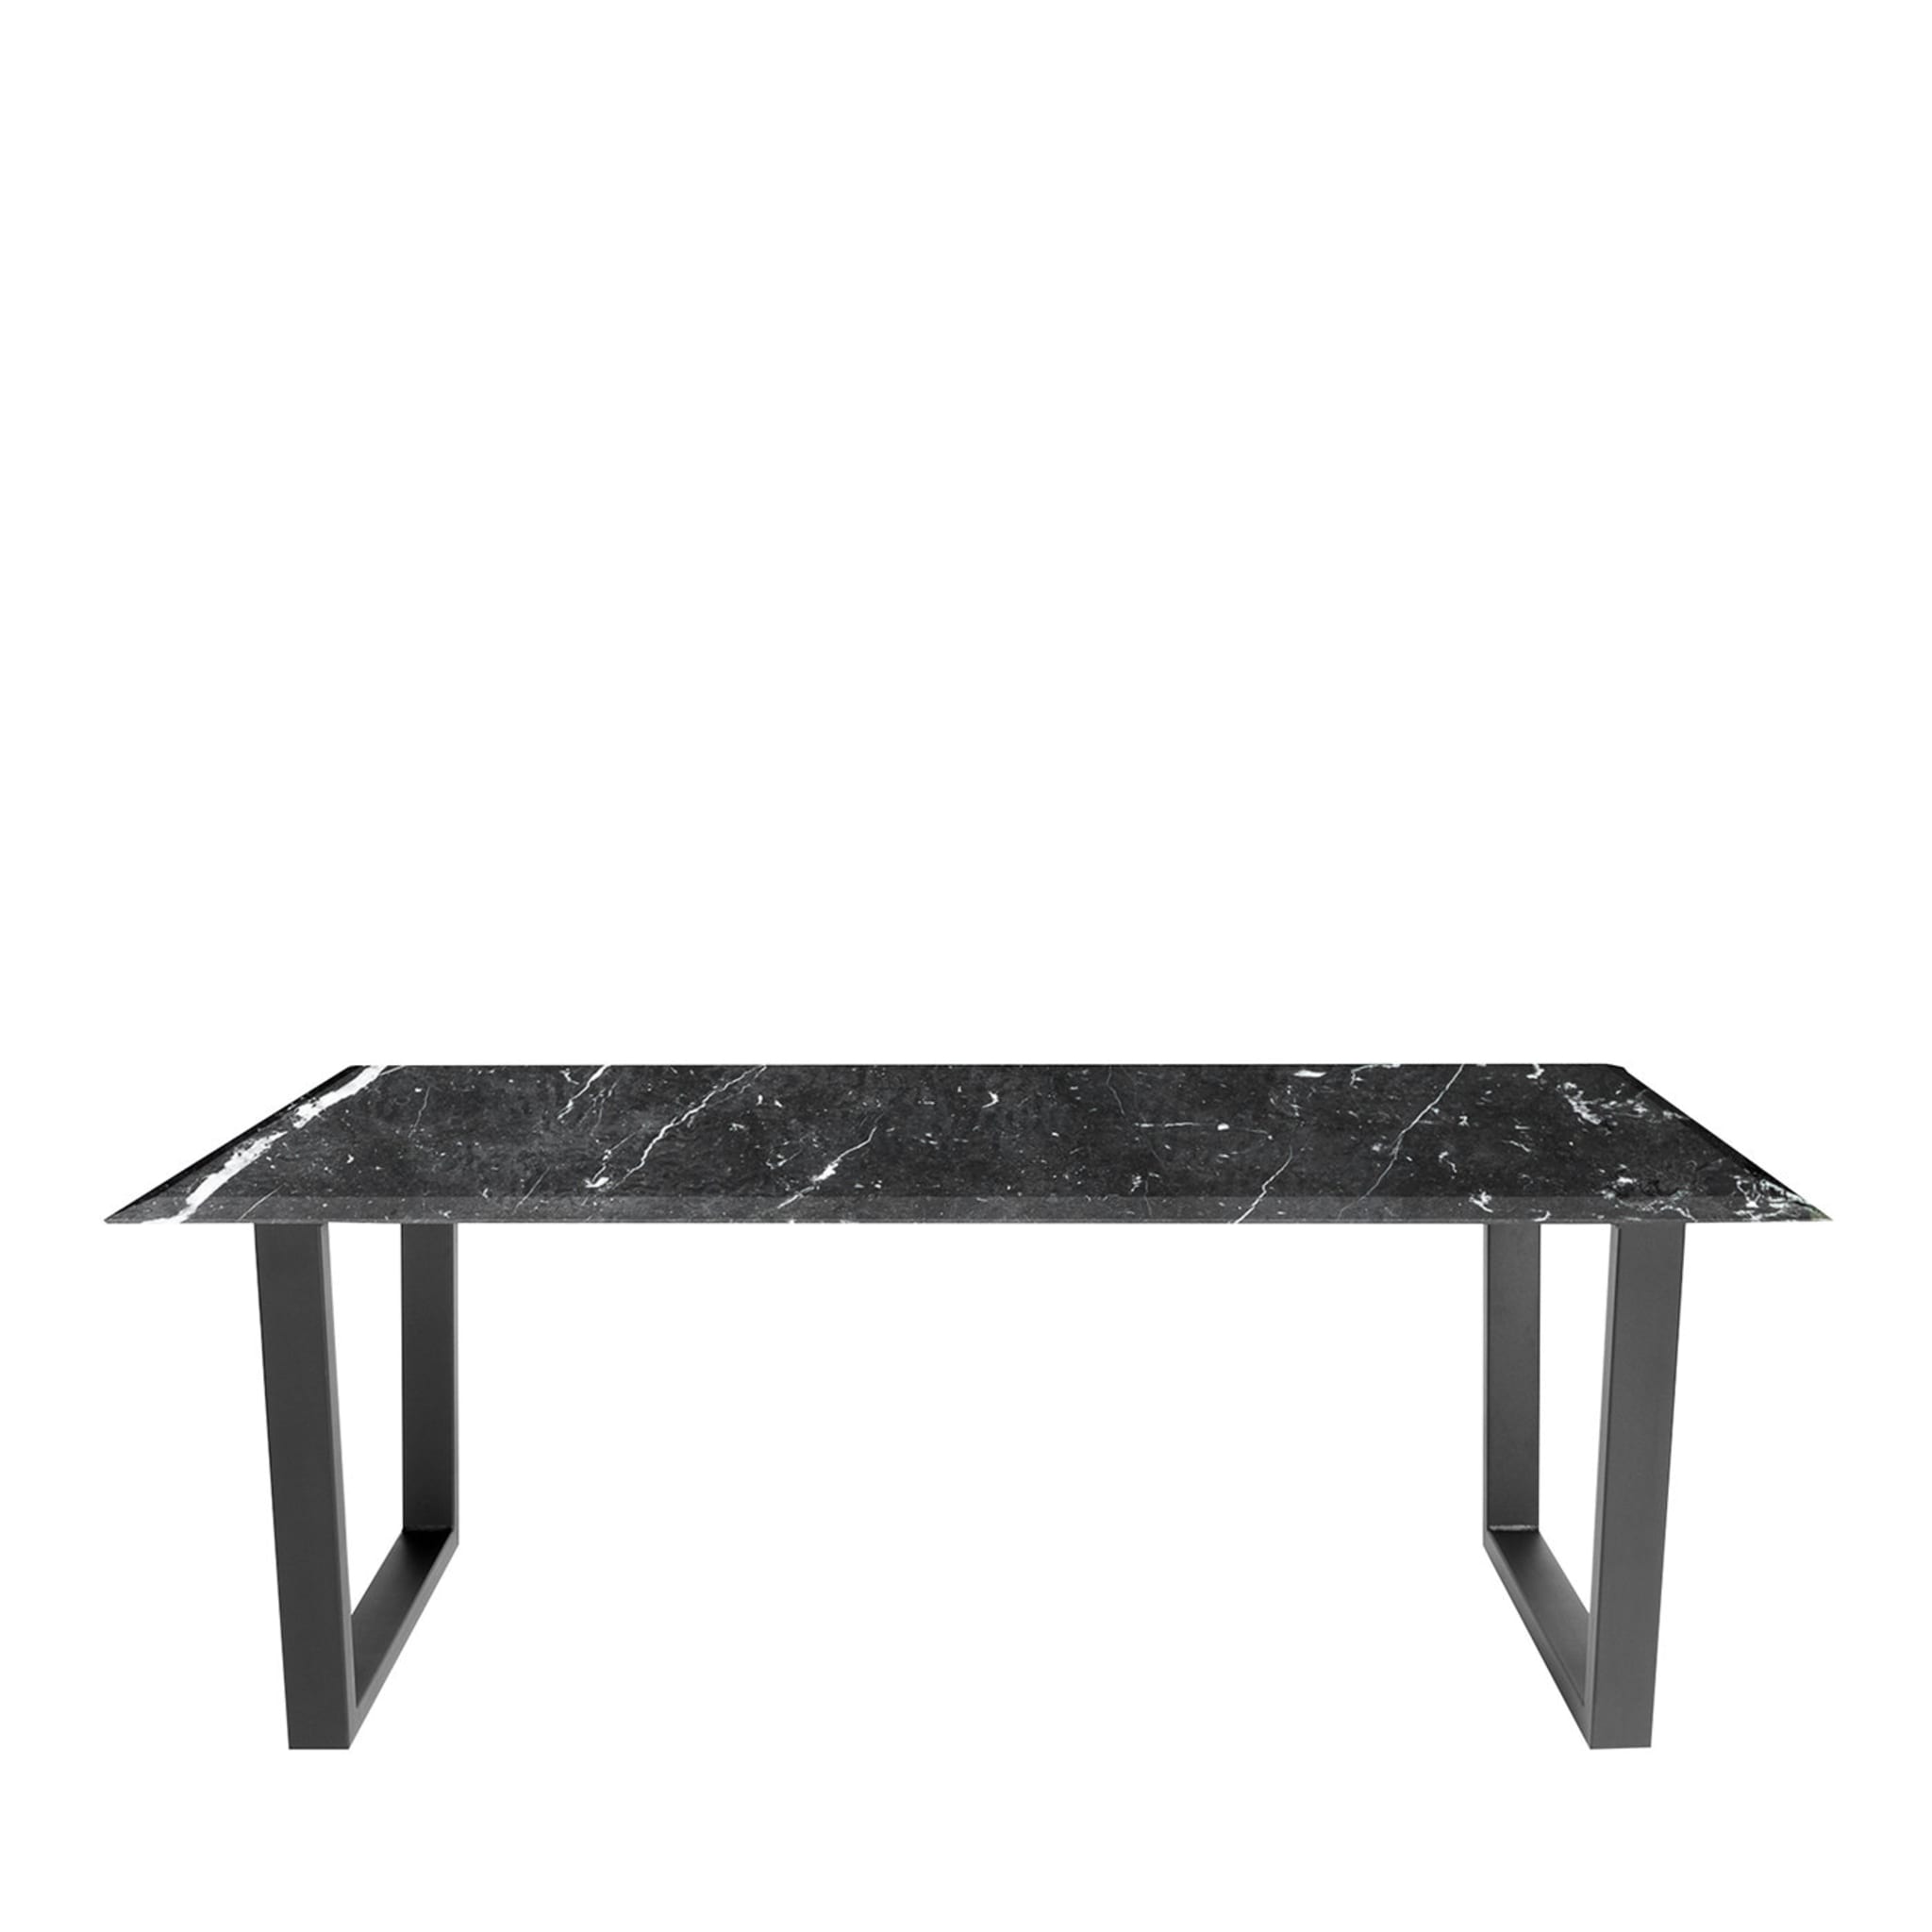 Levanzo Black Marquinia Dining Table - Main view